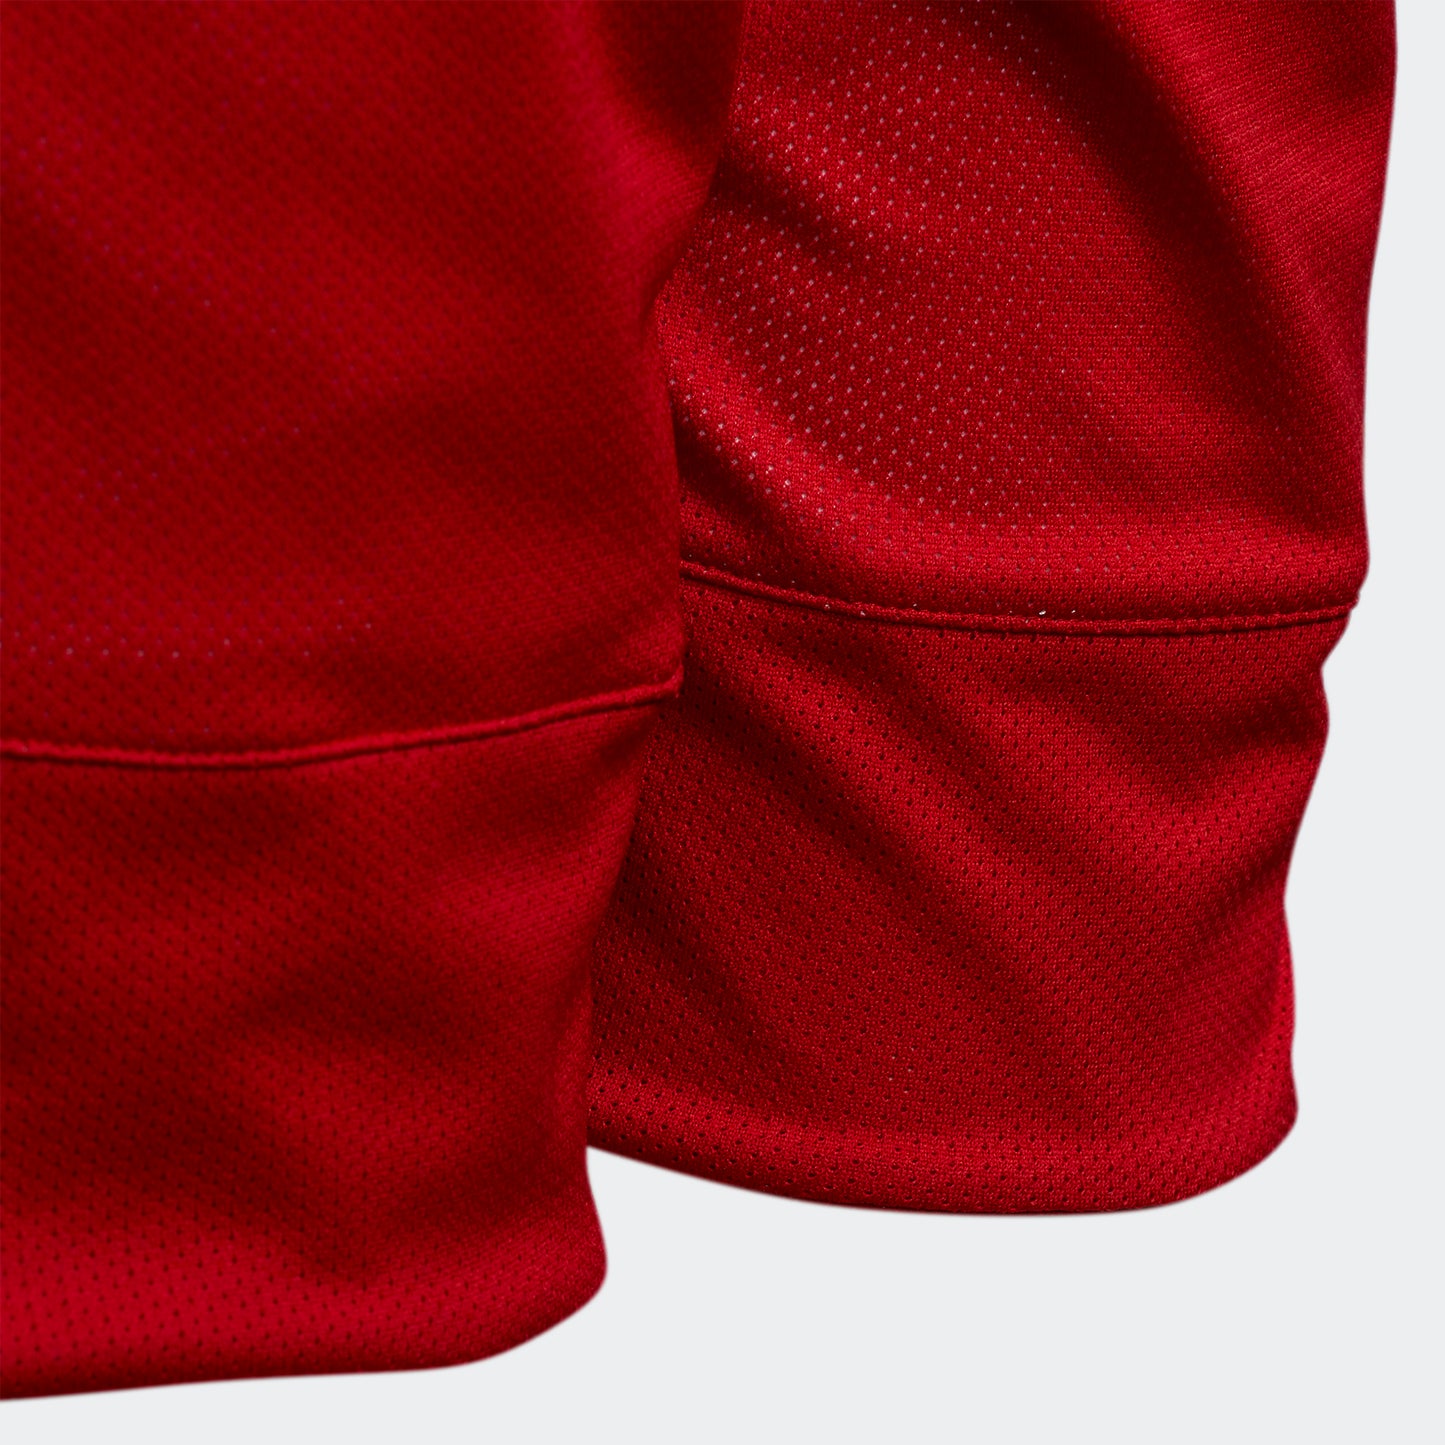 adidas 3G SPEED Reversible Basketball Shorts | Power Red-White | Youth